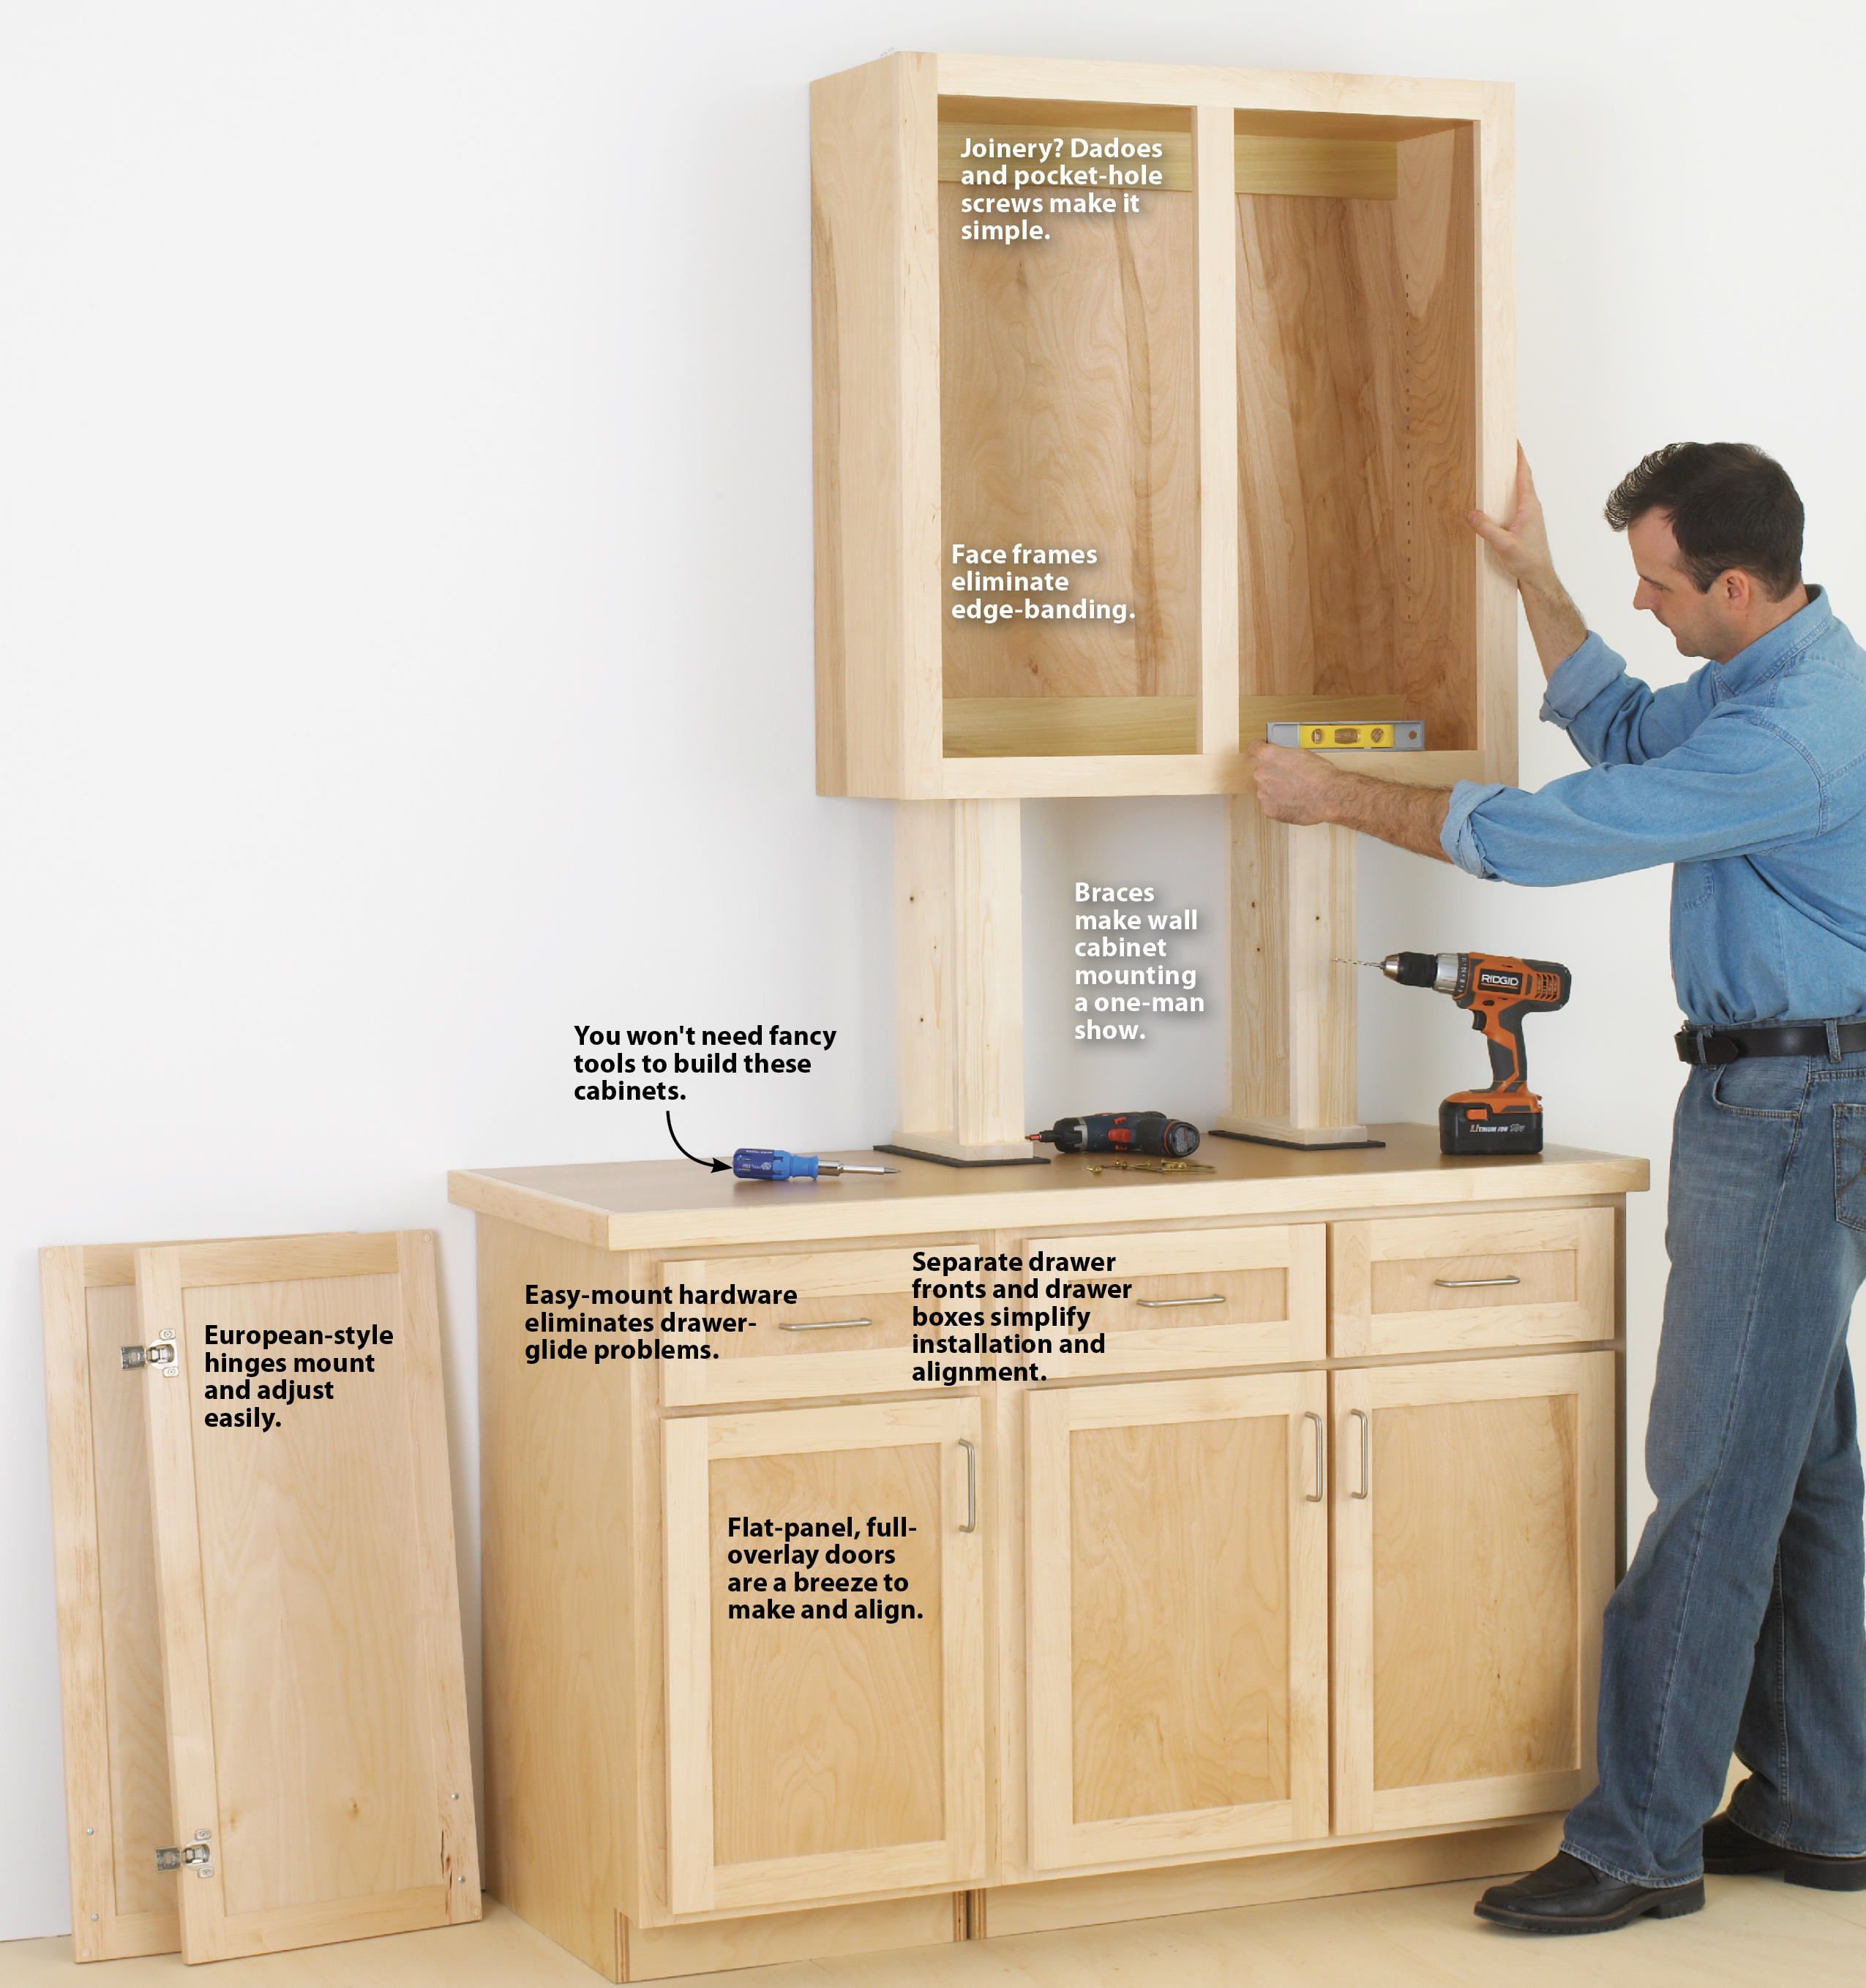 Make Cabinets The Easy Way Wood, How To Build Own Kitchen Cabinets